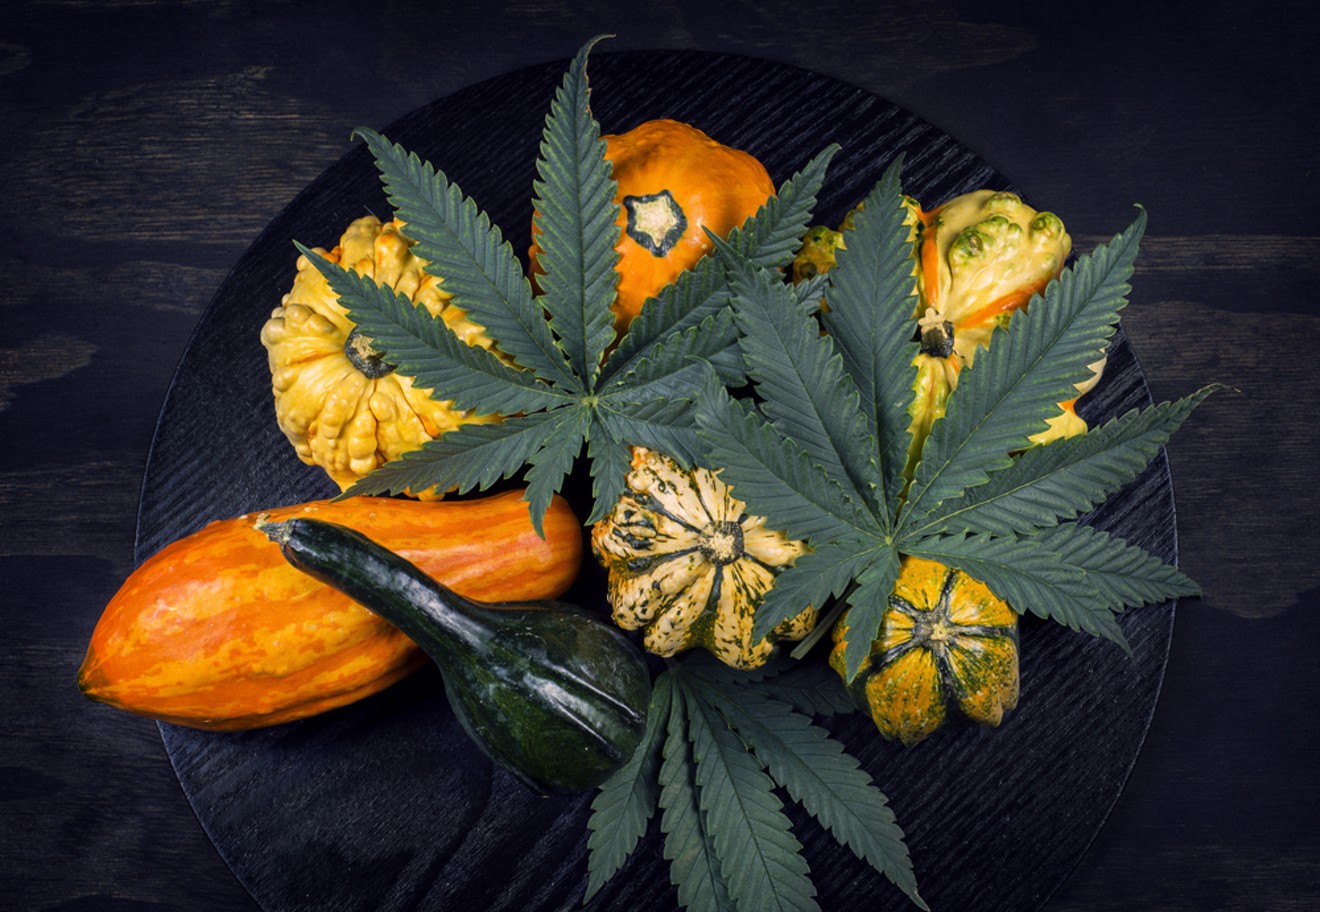 Turning your Thanksgiving into Danksgiving doesn't have to add much work to your cooking responsibilities.